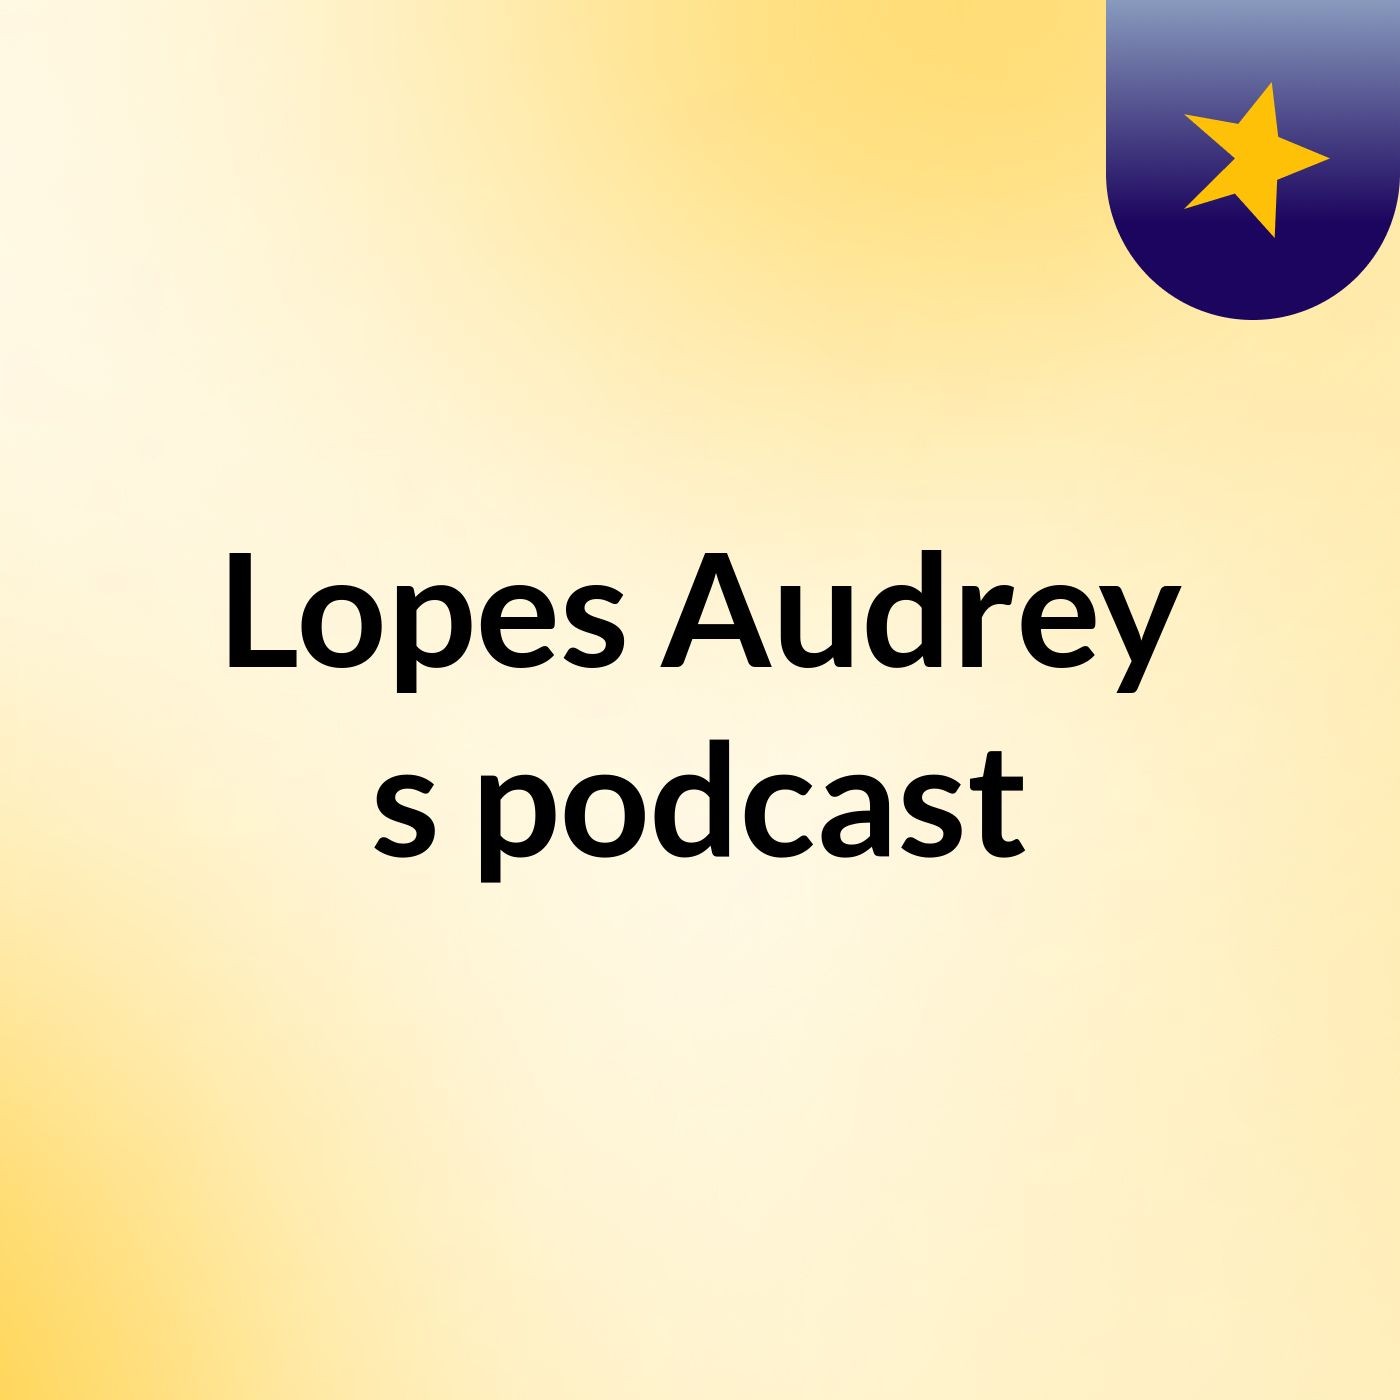 Lopes Audrey's podcast